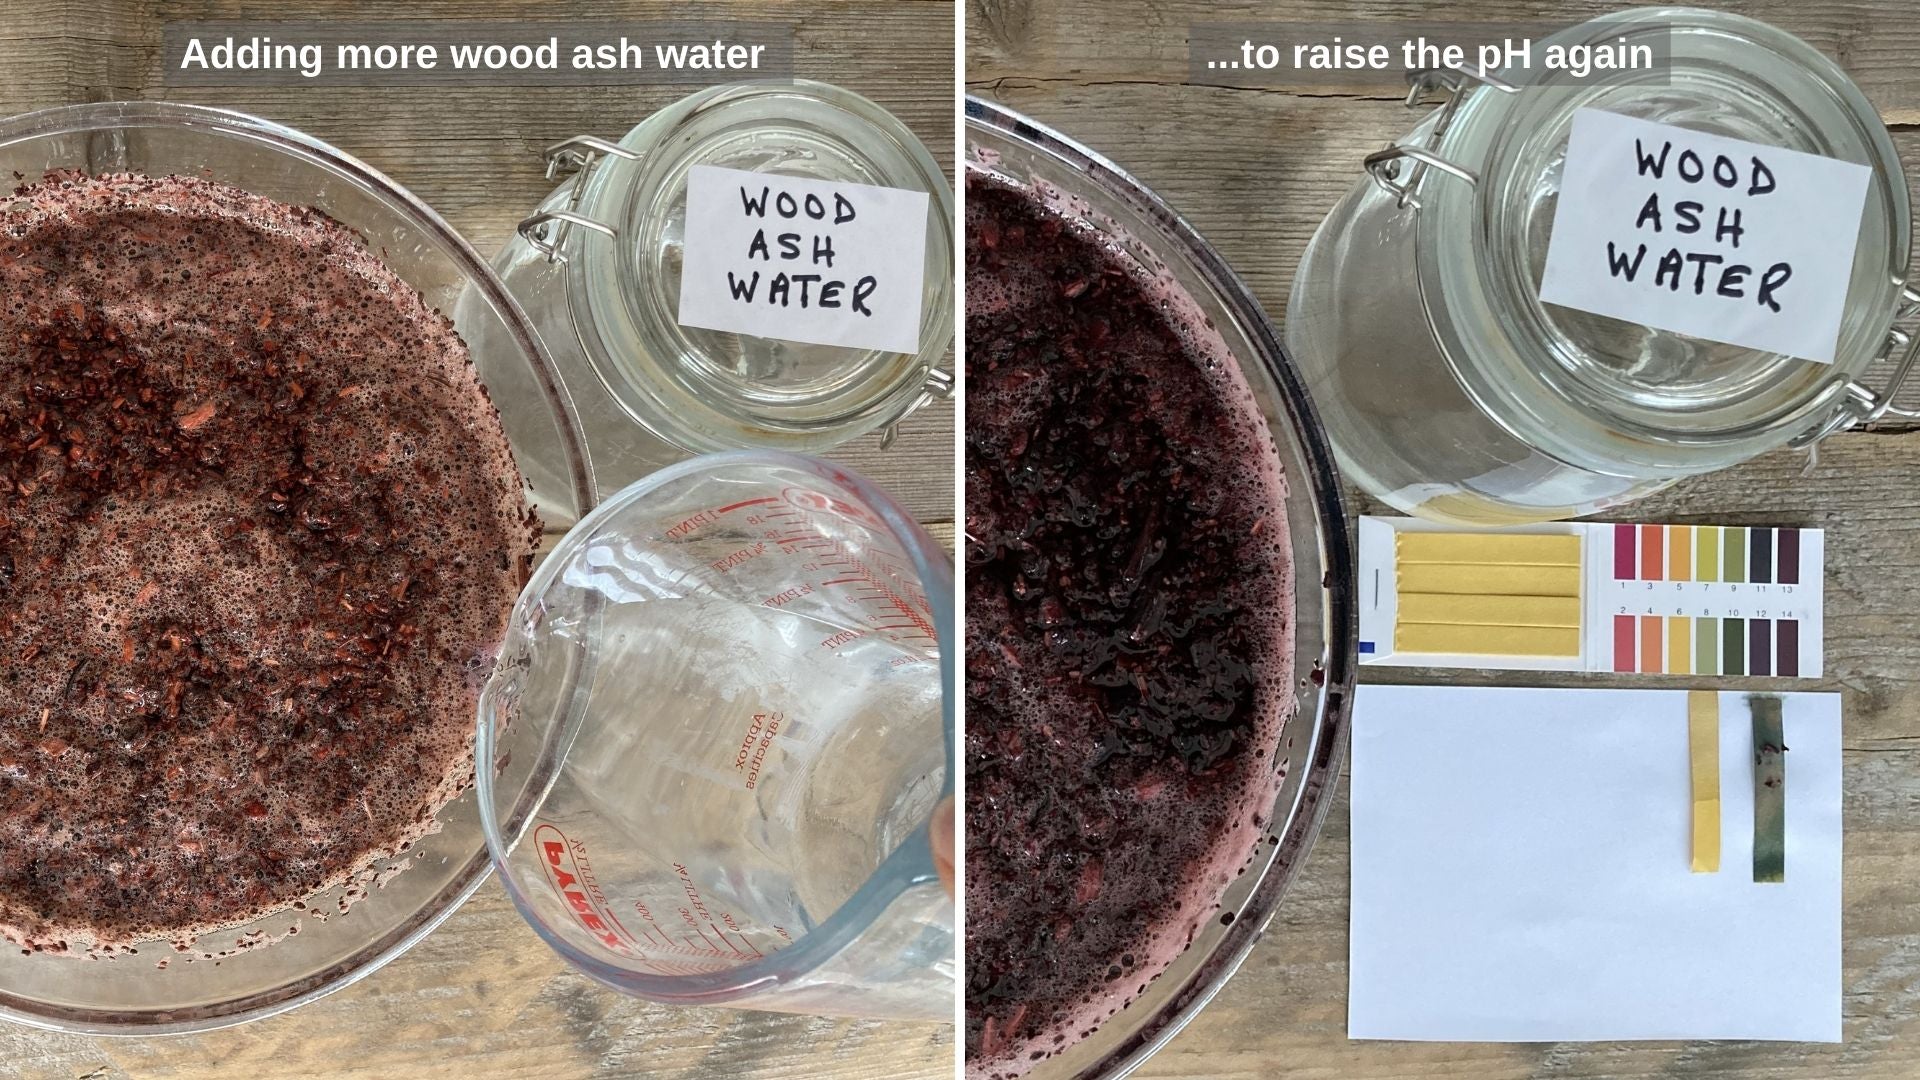 Adding more wood ash water to raise the pH again